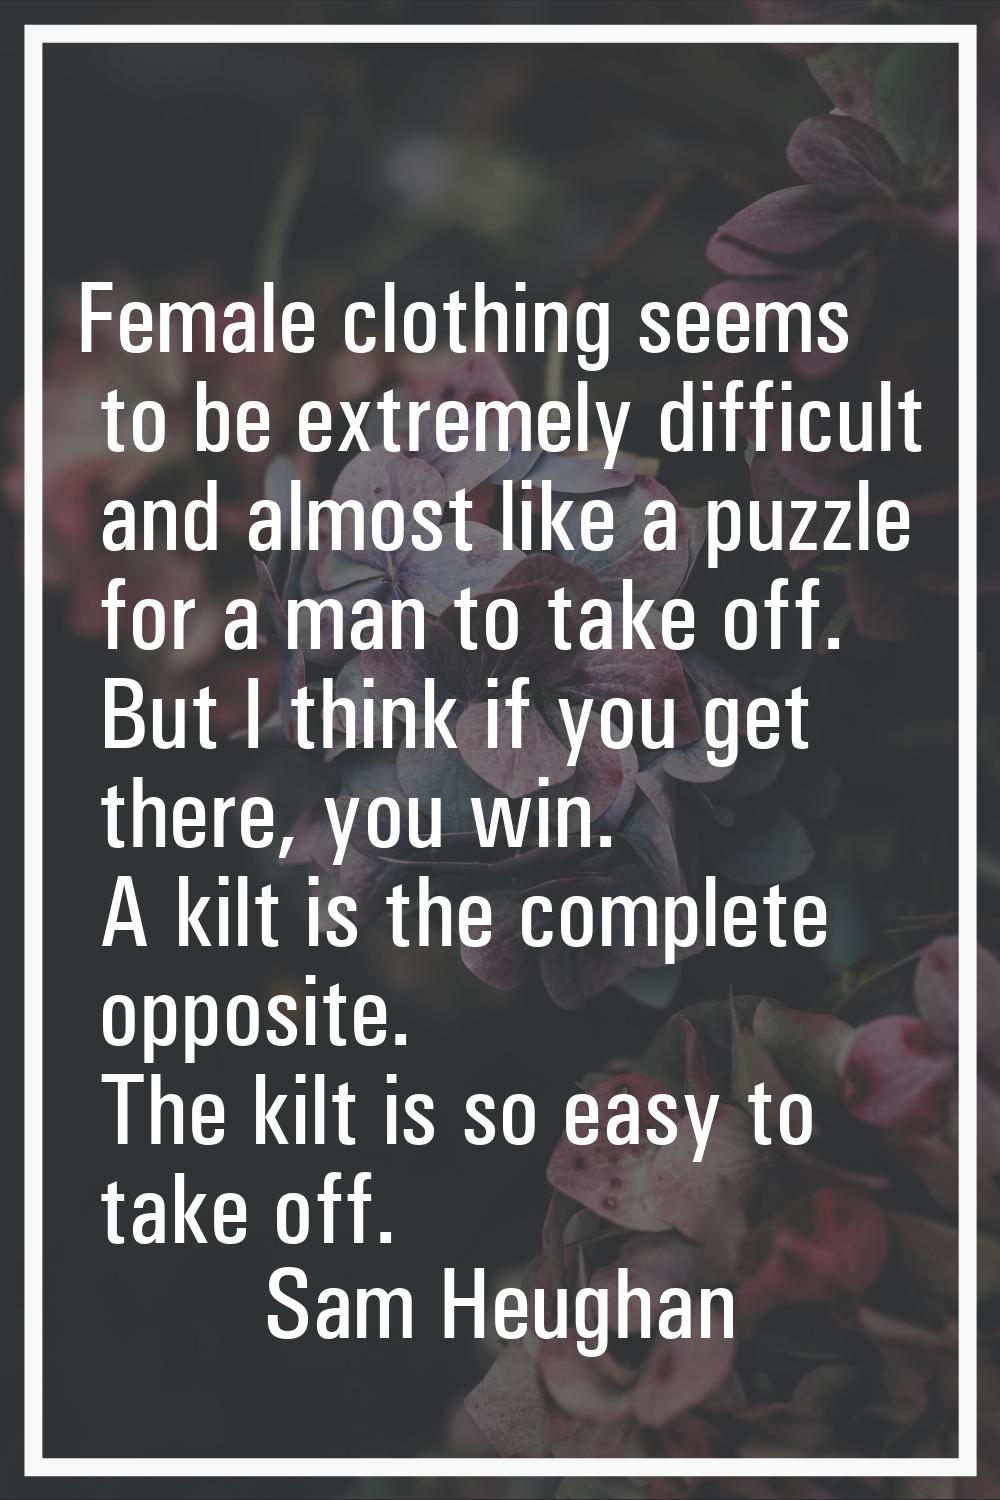 Female clothing seems to be extremely difficult and almost like a puzzle for a man to take off. But